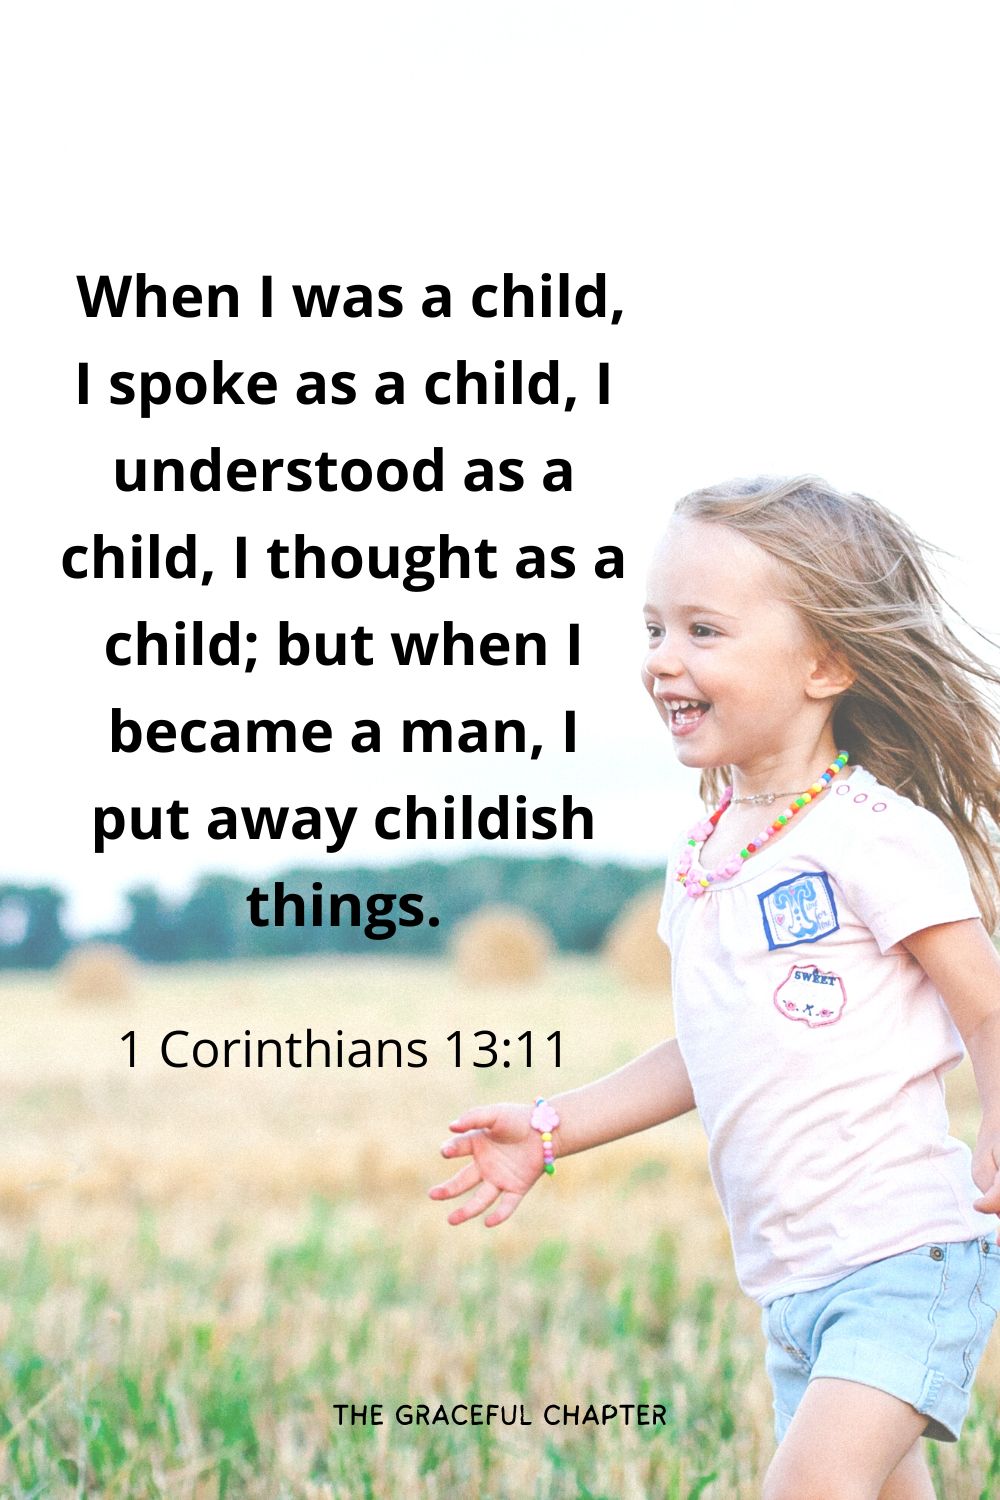  When I was a child, I spoke as a child, I understood as a child, I thought as a child; but when I became a man, I put away childish things.